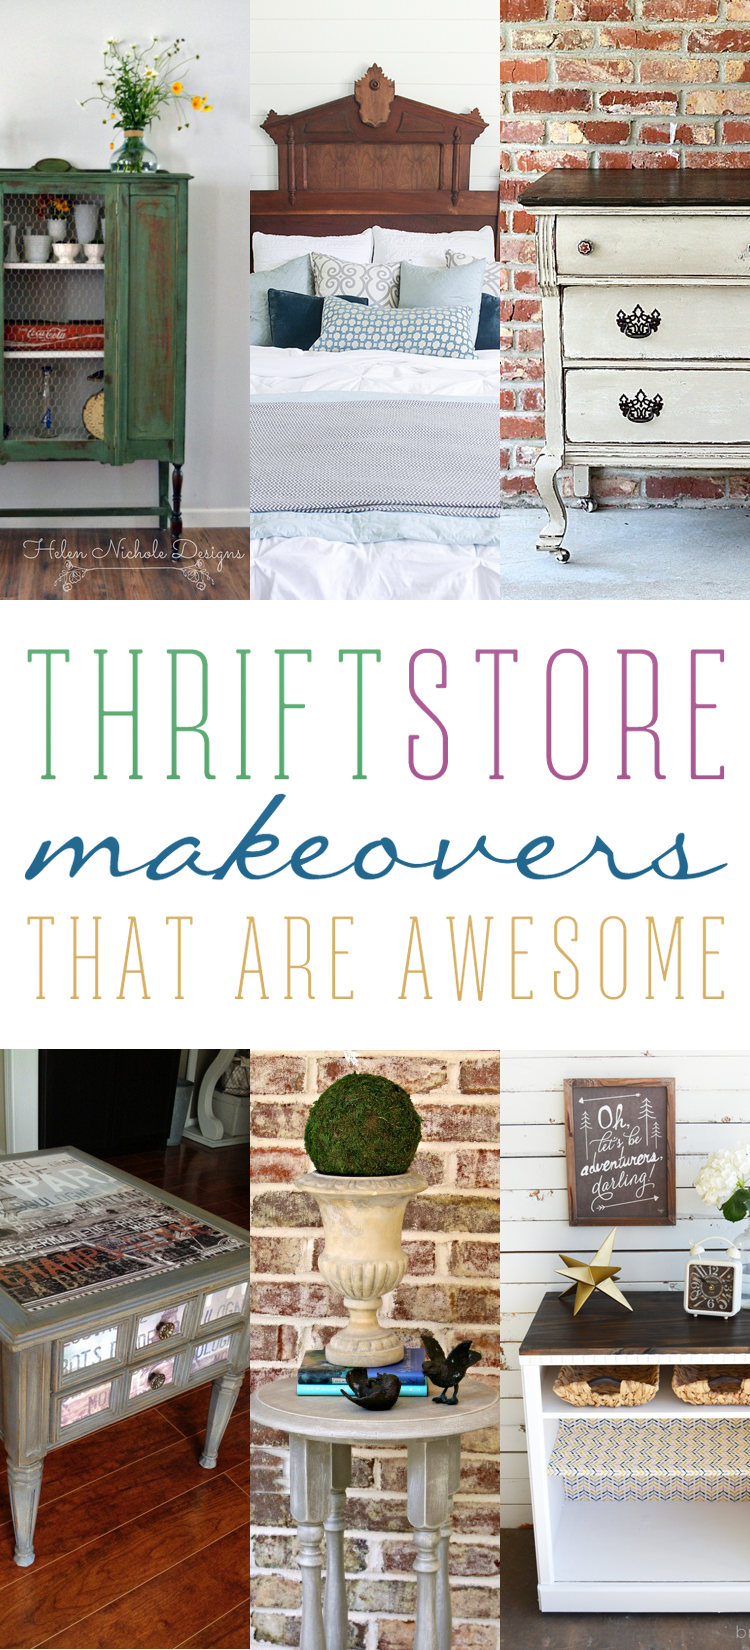 http://thecottagemarket.com/wp-content/uploads/2015/10/makeovers-tower-001.png